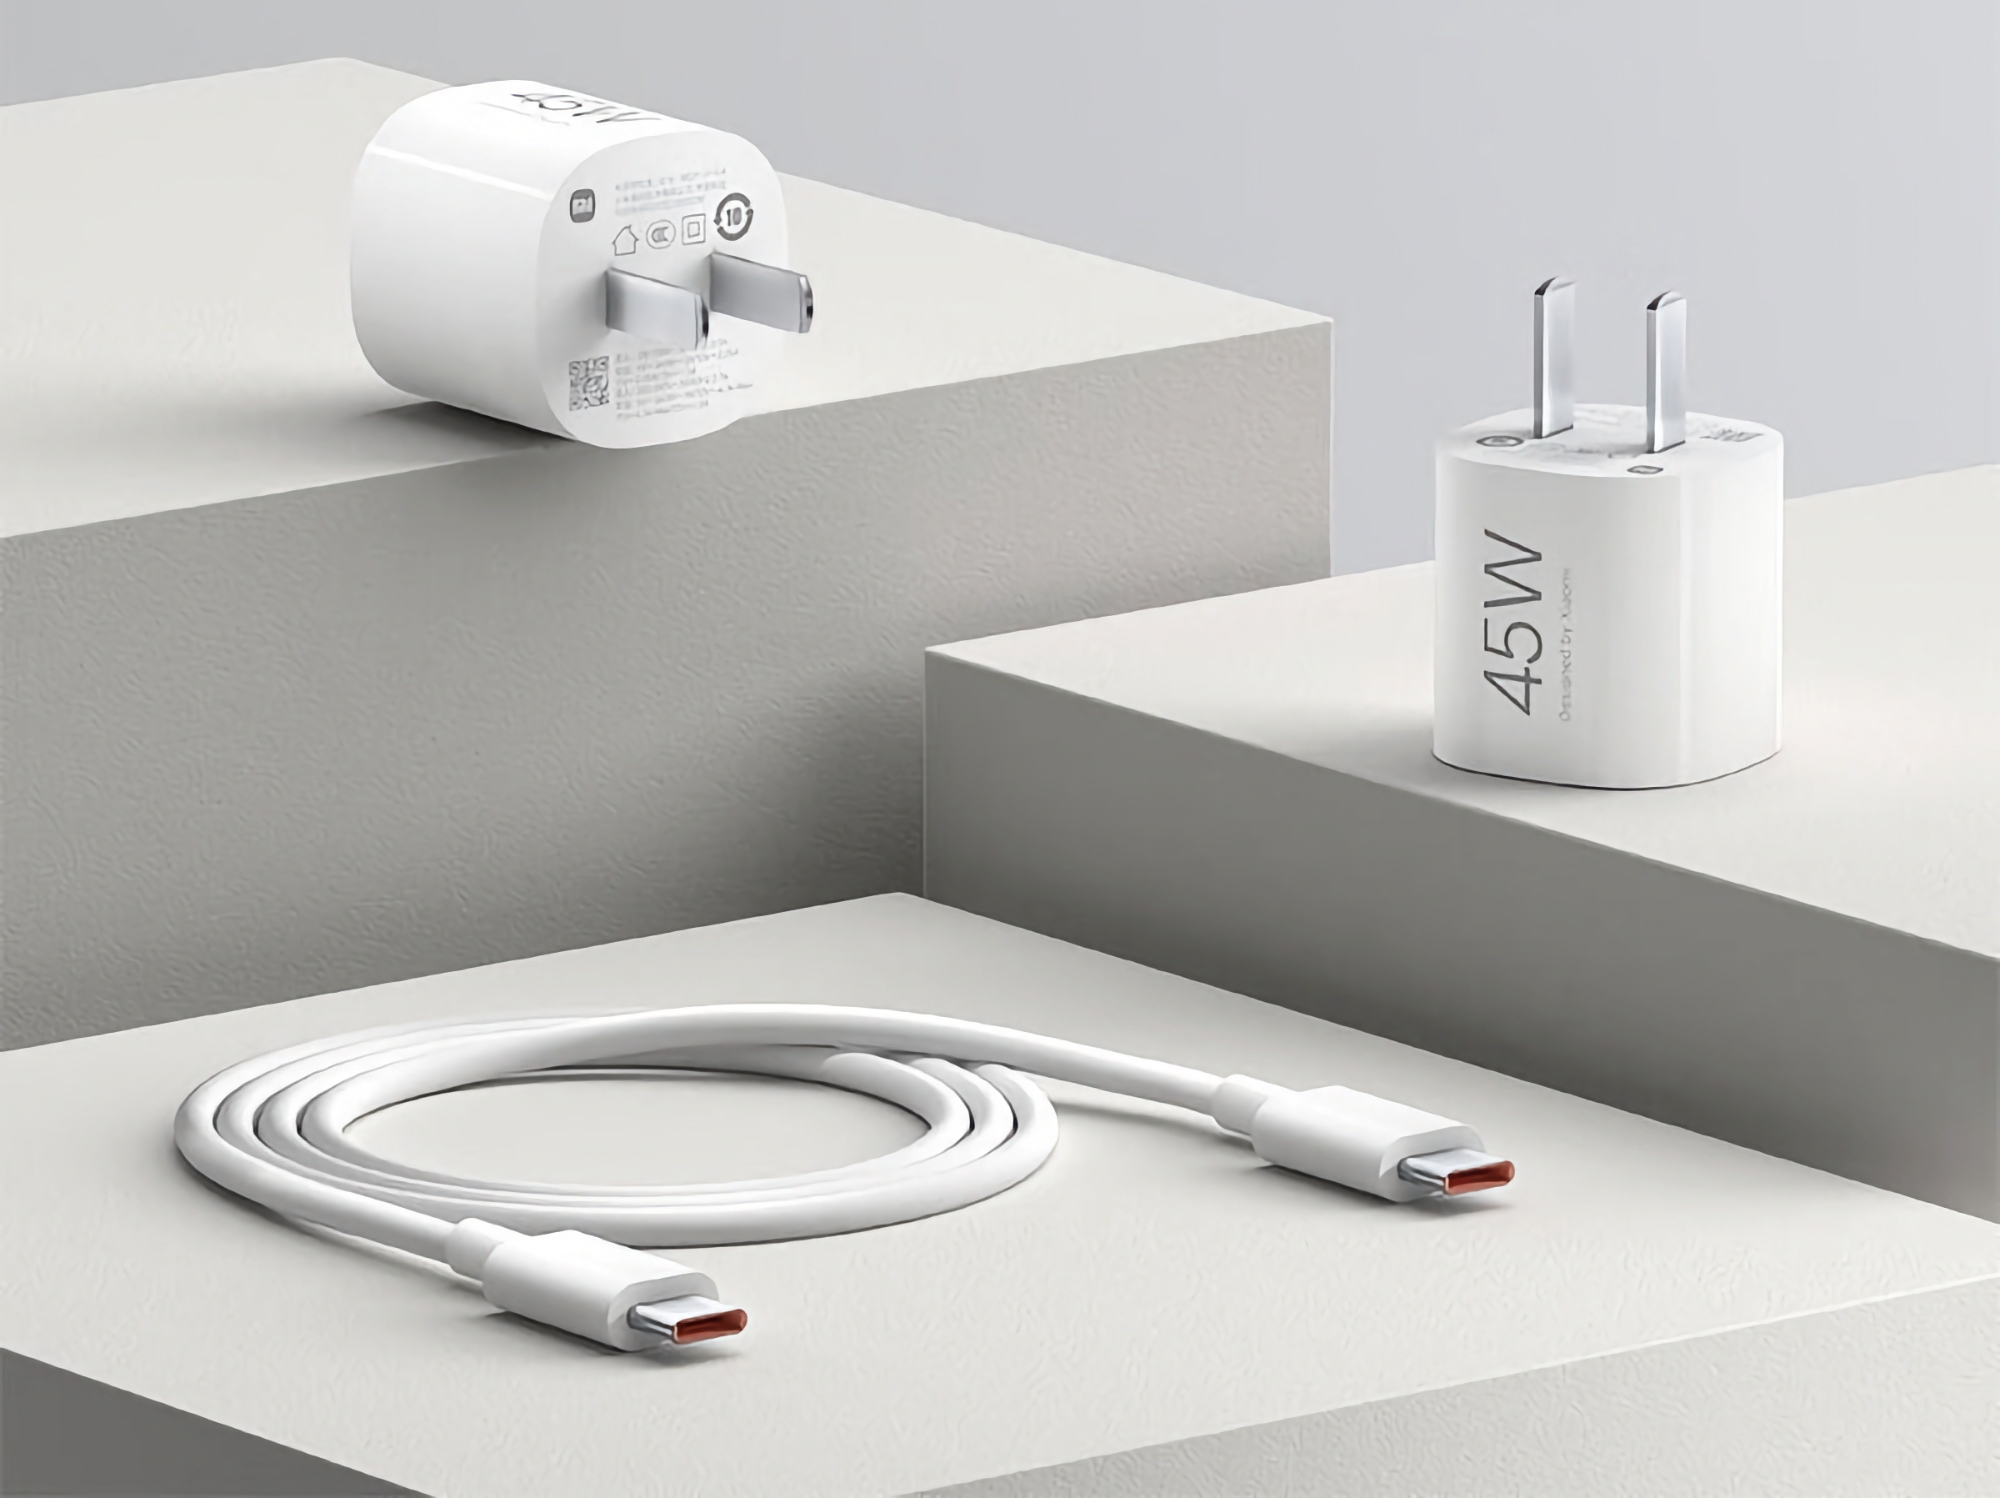 Xiaomi has unveiled a 45W GaN charger with a bundled USB-C cable and a price tag of $8